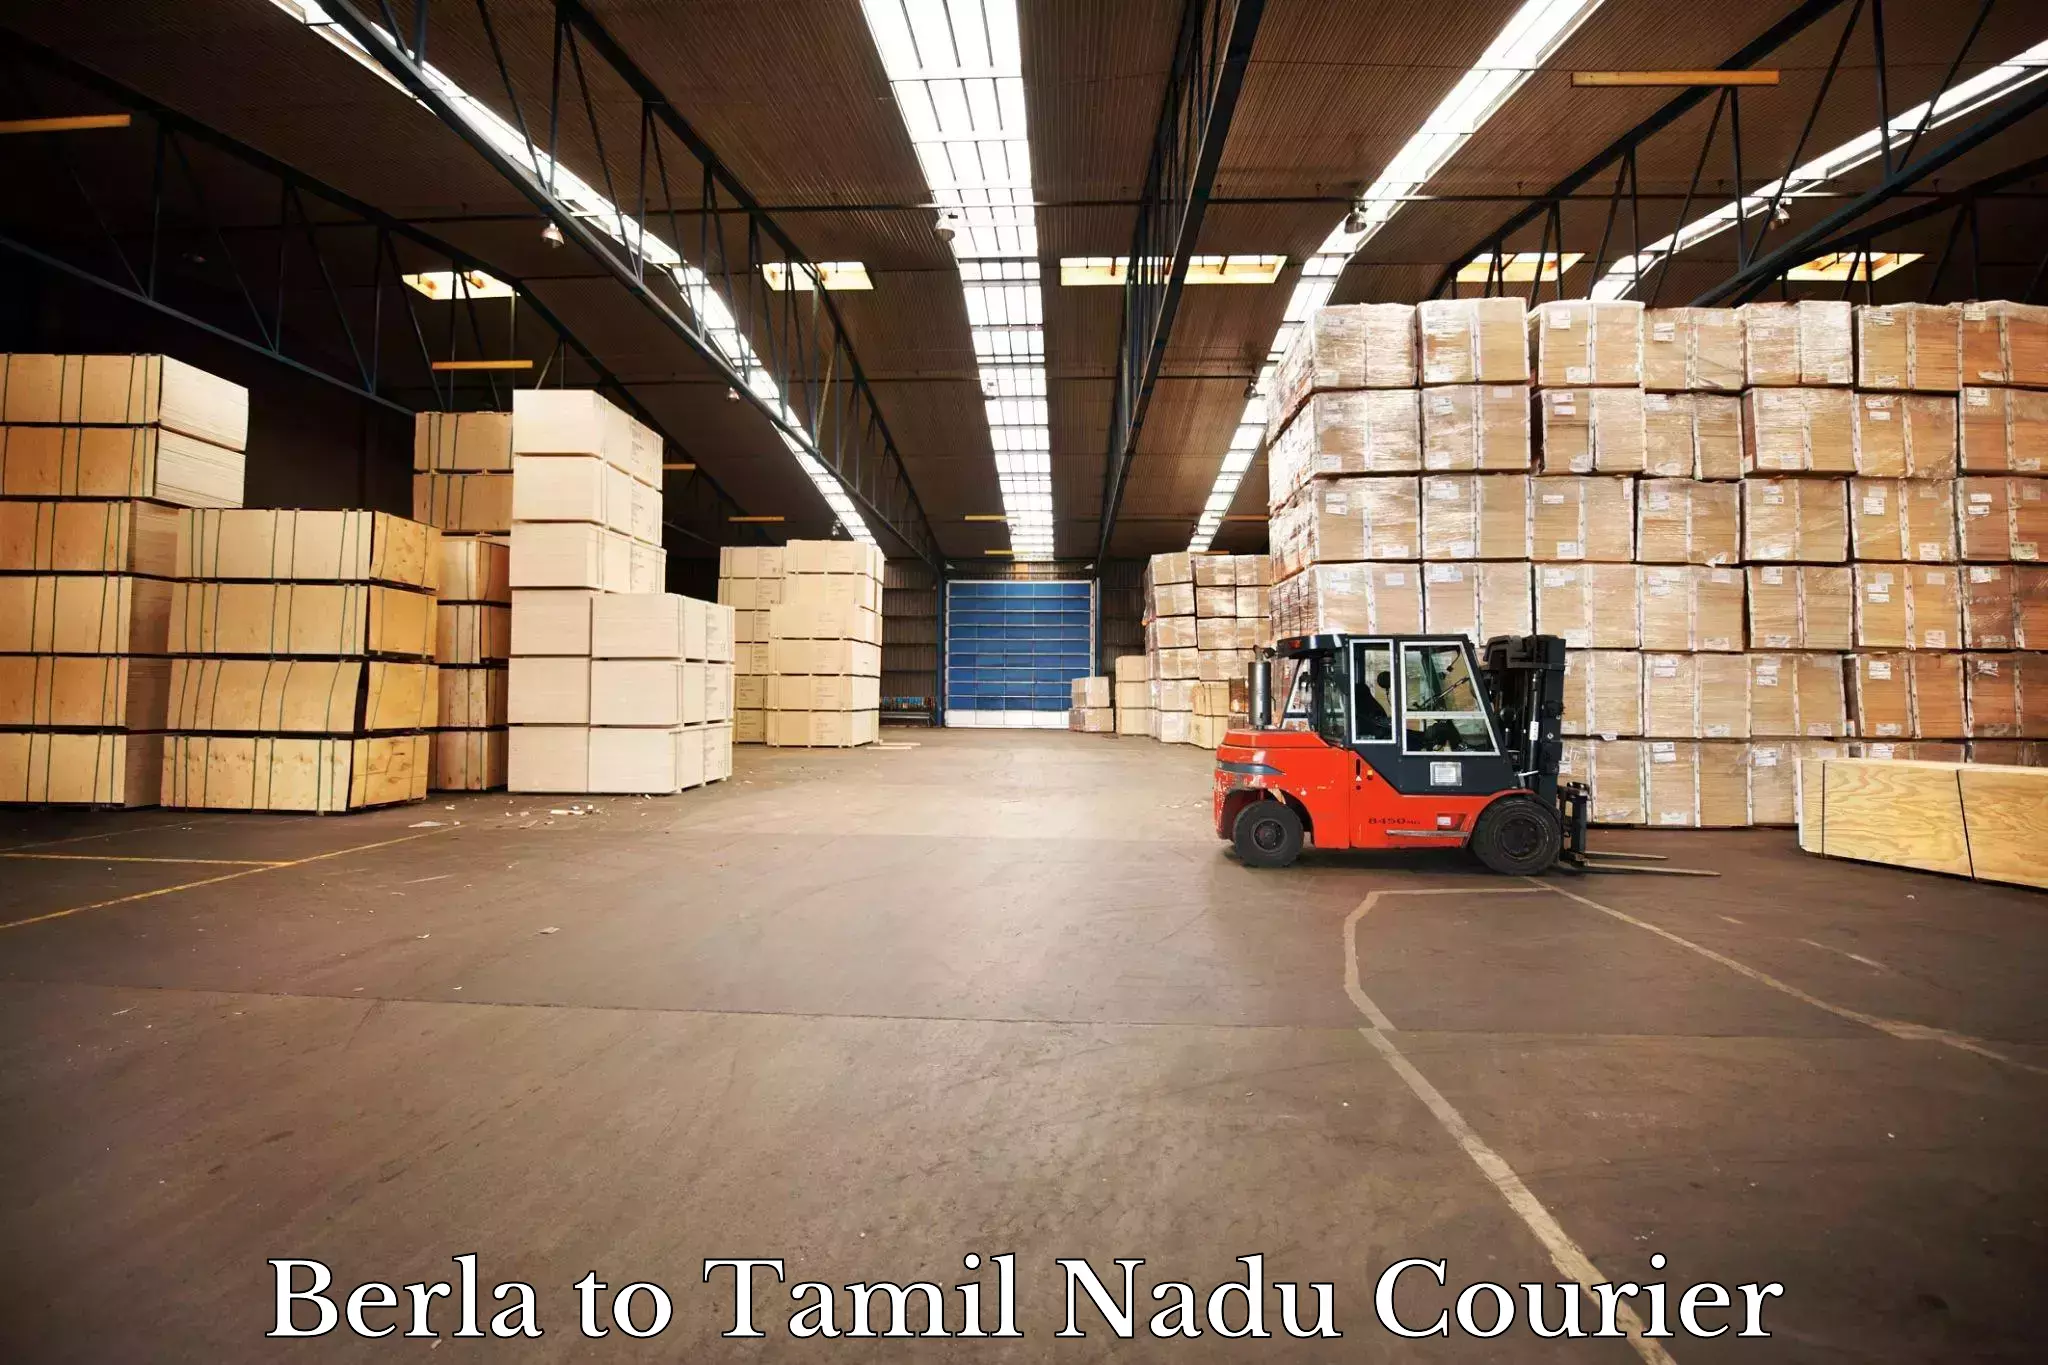 Subscription-based courier Berla to Chennai